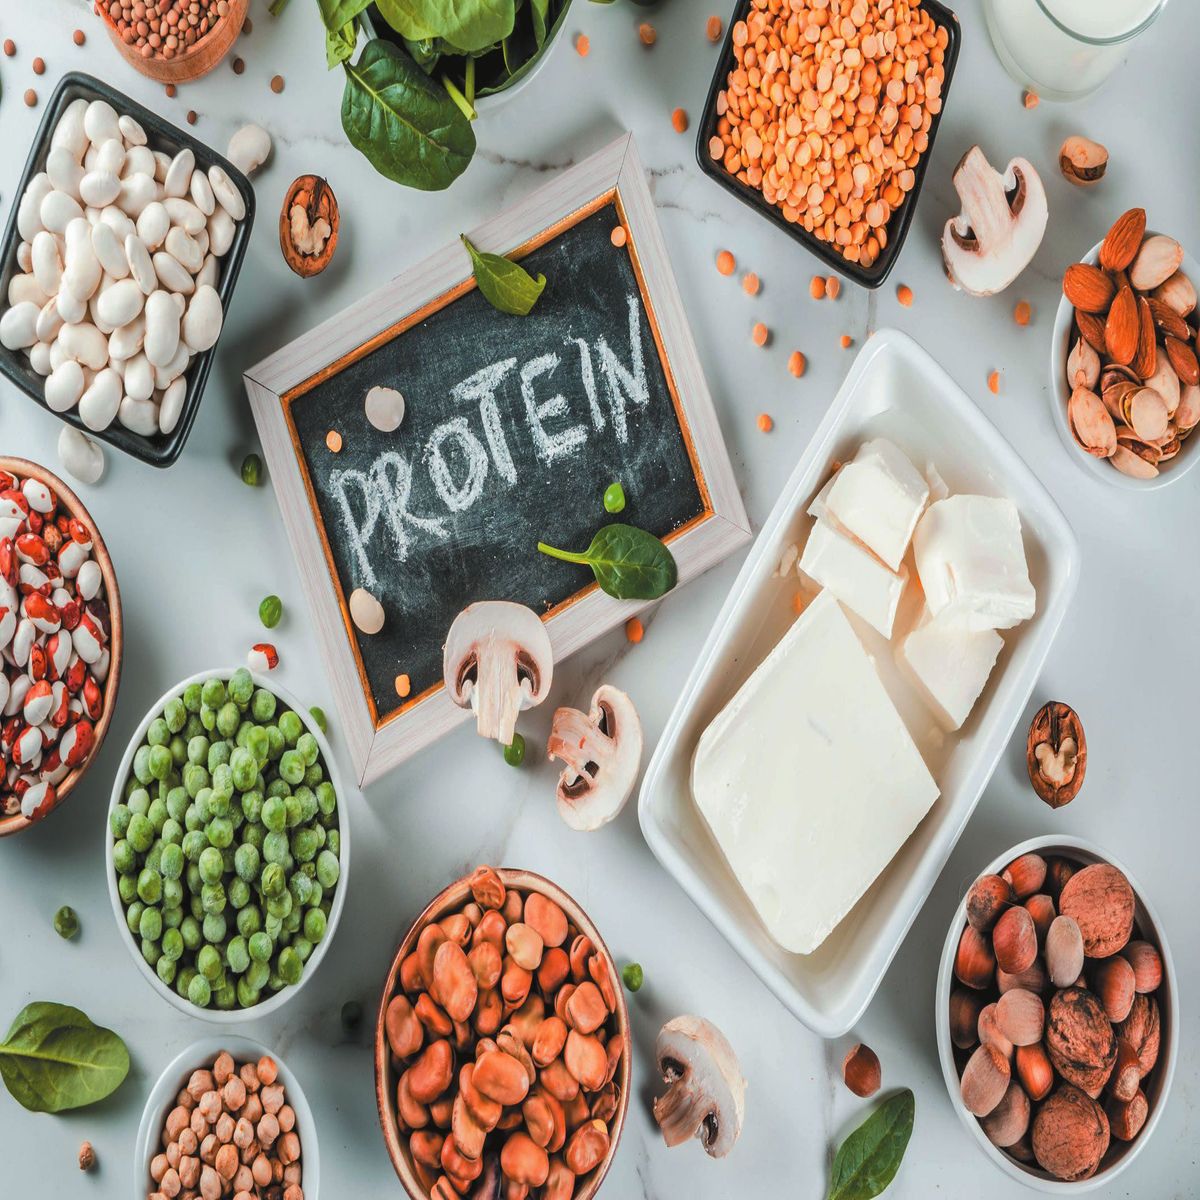 55 Essential Protein Sources for Vegans and Vegetarians article courtesy of That Green Lyfe